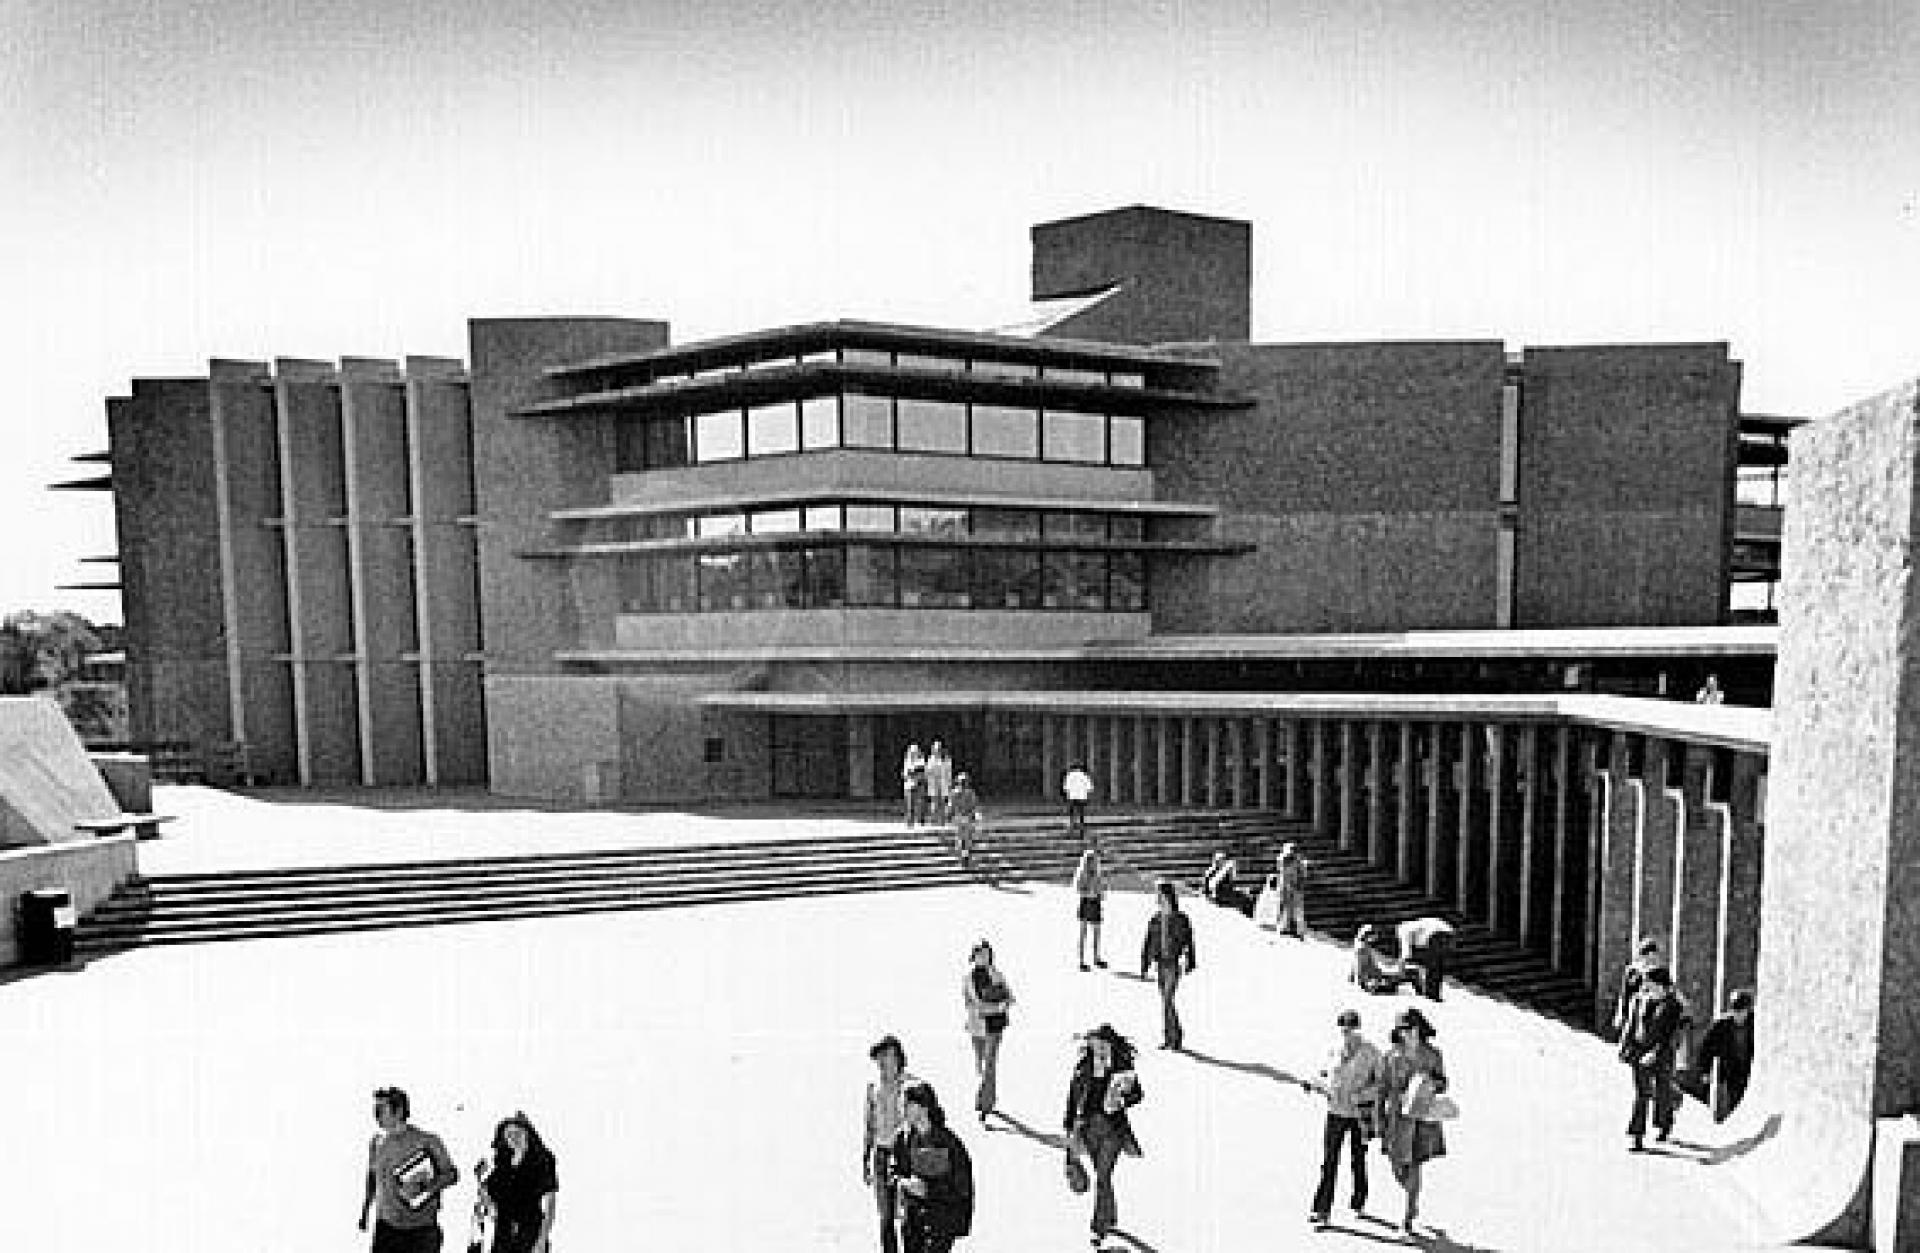 Bata Library, Trent University, Peterborough (1967-1969) by Ronald Thom. | Photo via FIG projects